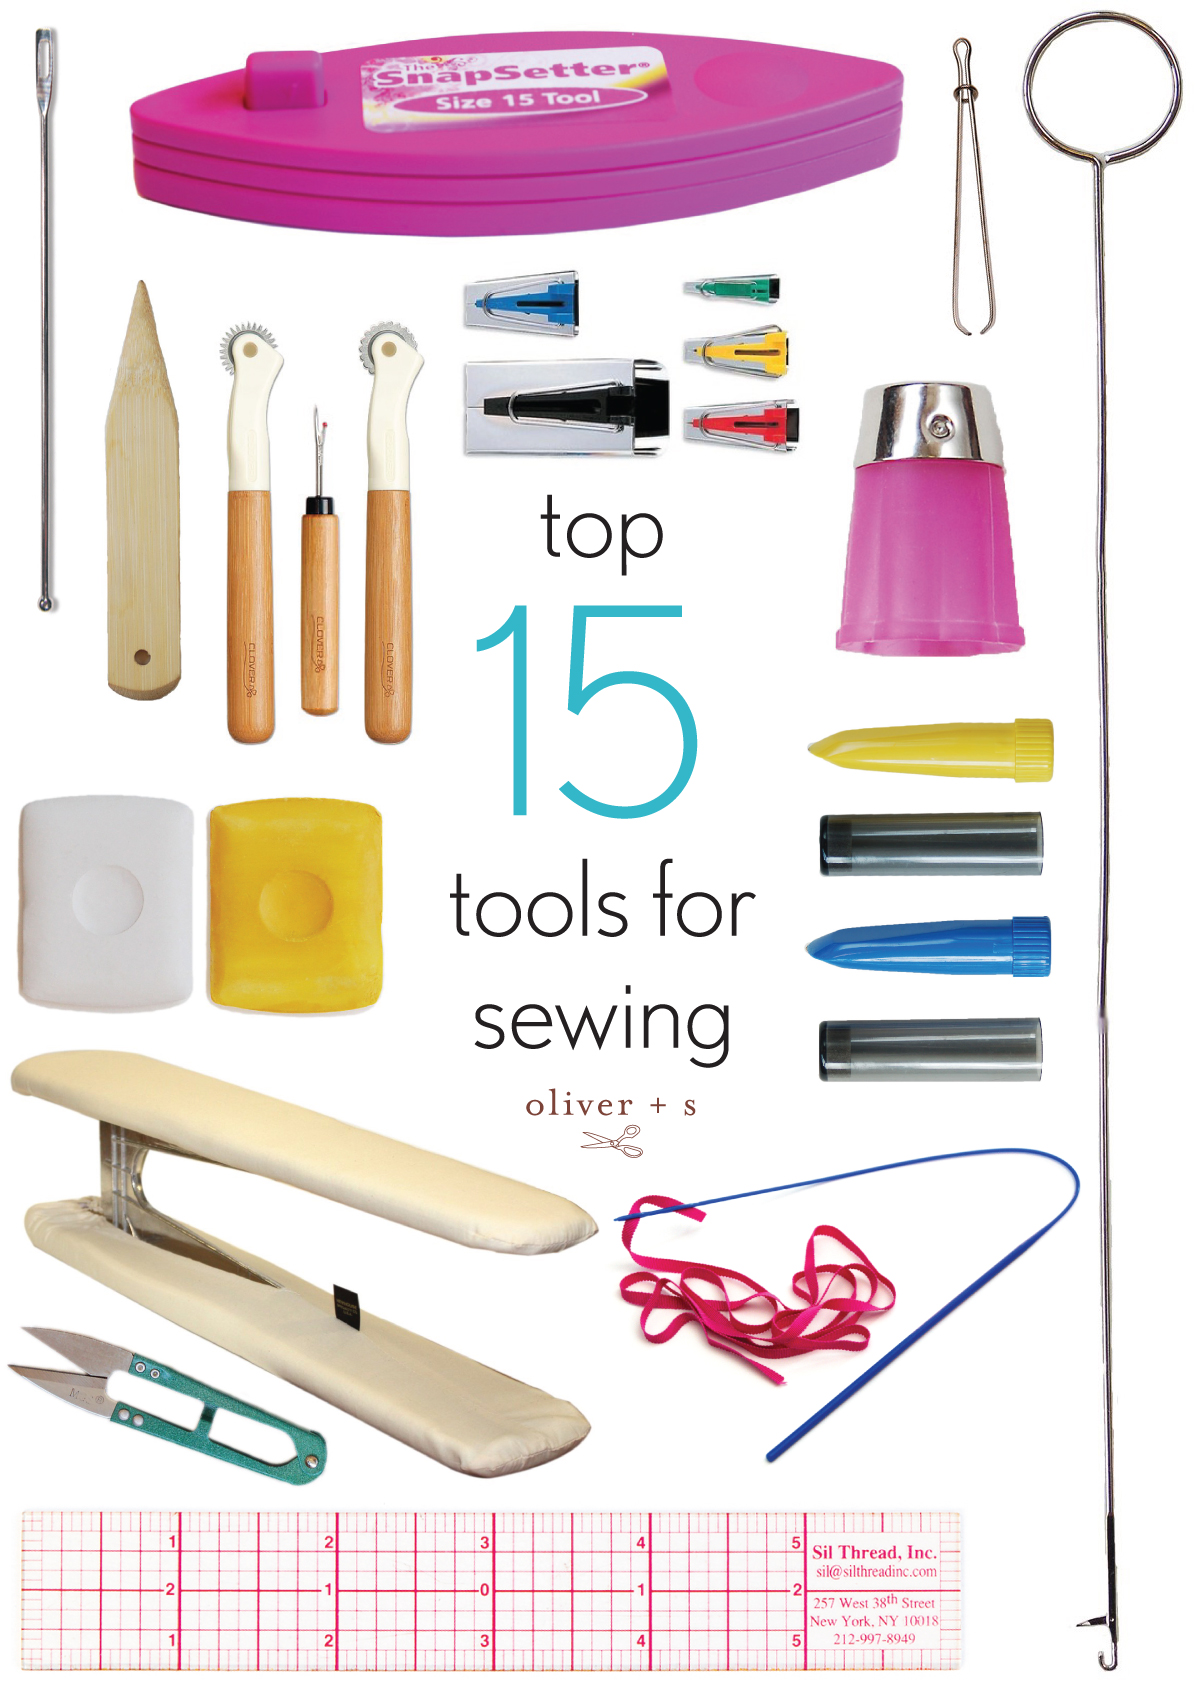 Marking Tools for Sewing, Best Tools for Marking Fabric